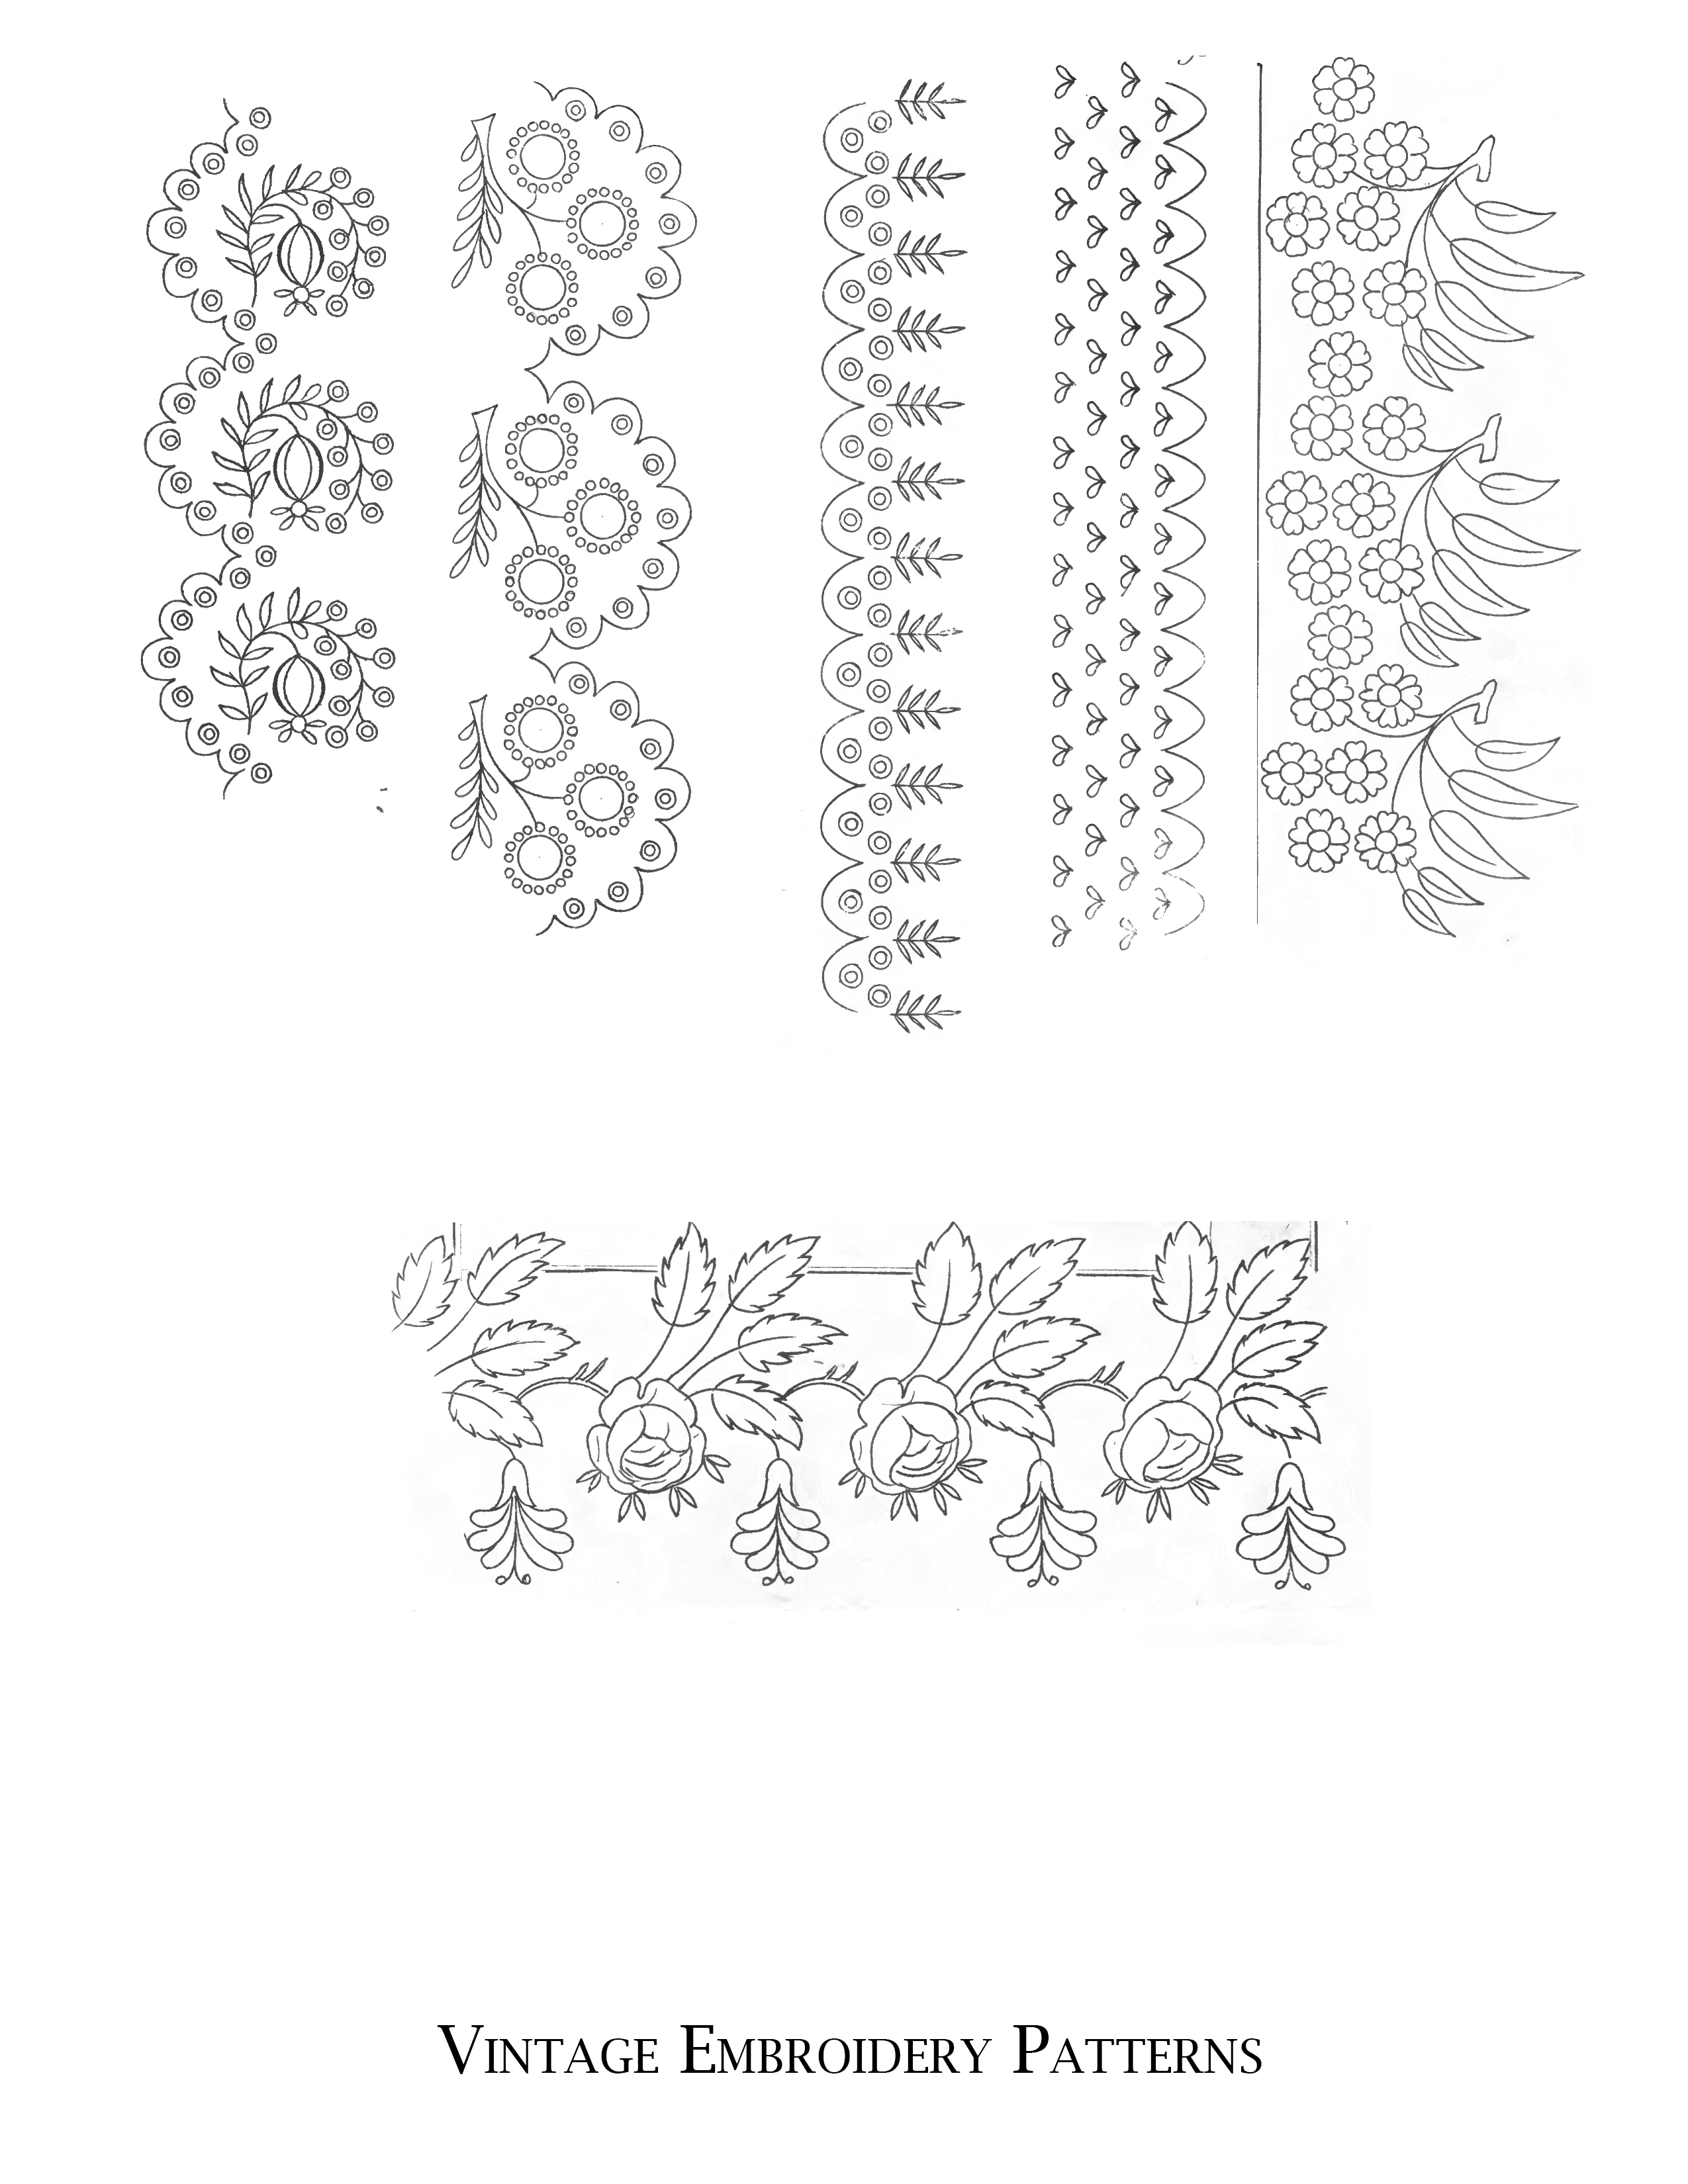 Victorian Embroidery Patterns Embroidery Patterns Archives Page 2 Of 2 The Graffical Muse